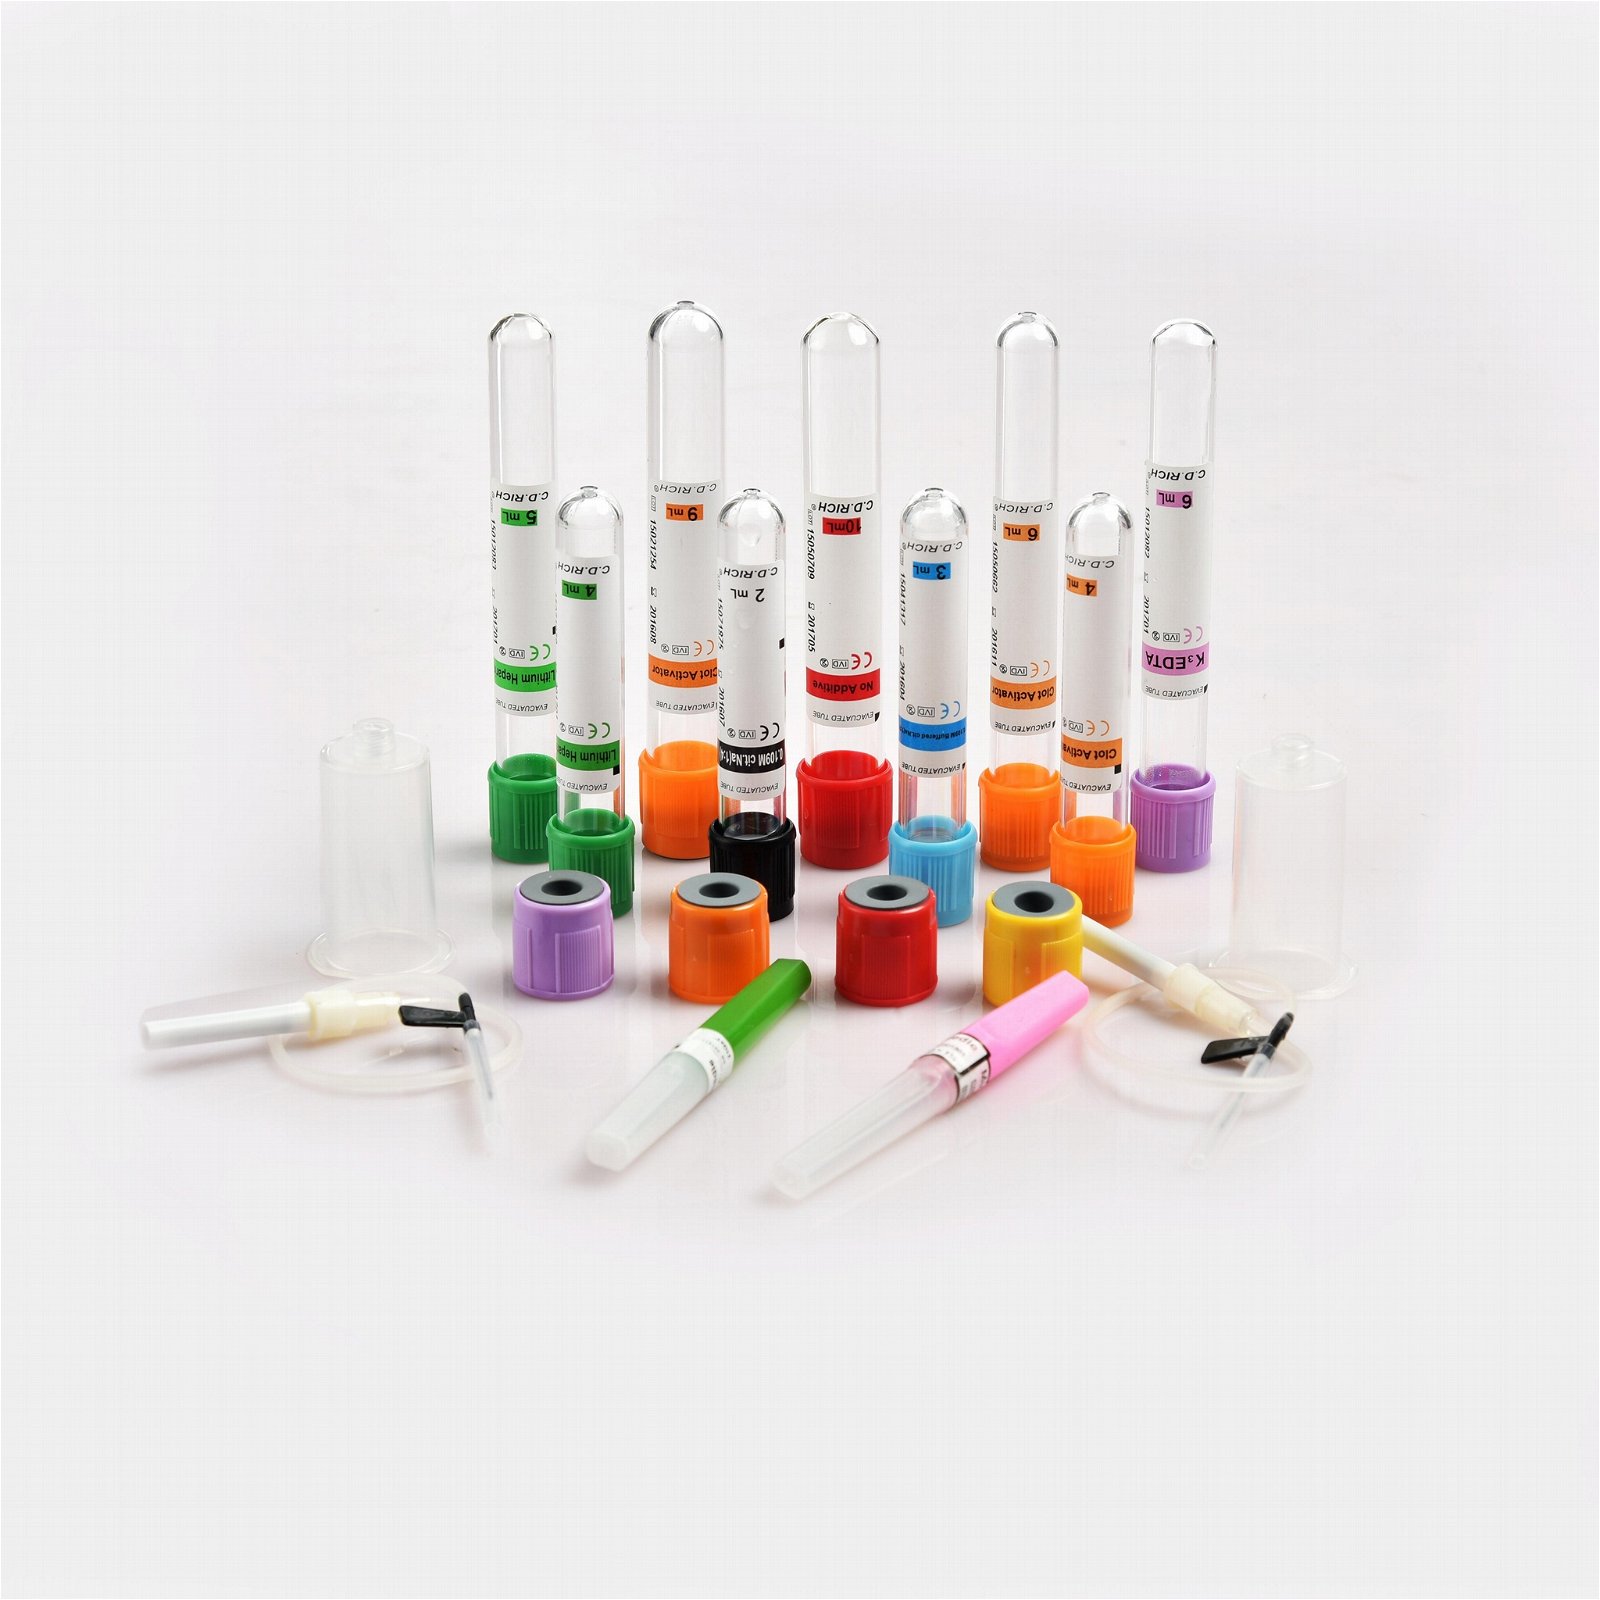 Clot Activator Tubes Evacuated Blood Collection Serum Tube, Test Tube for Blood  4